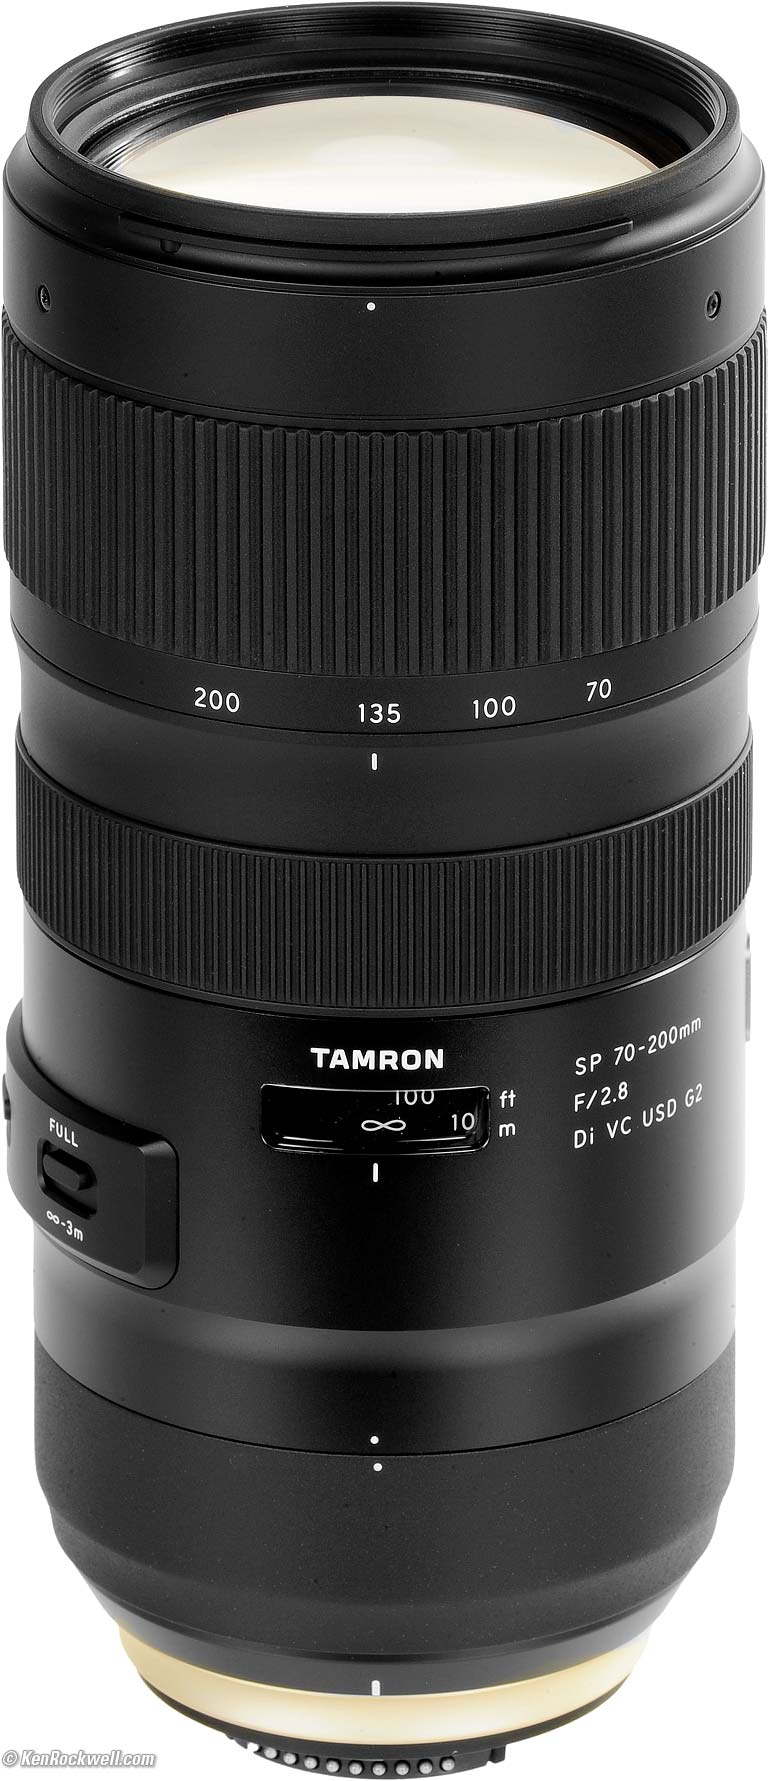 Tamron Sp 70 0mm F 2 8 Vc G2 Review